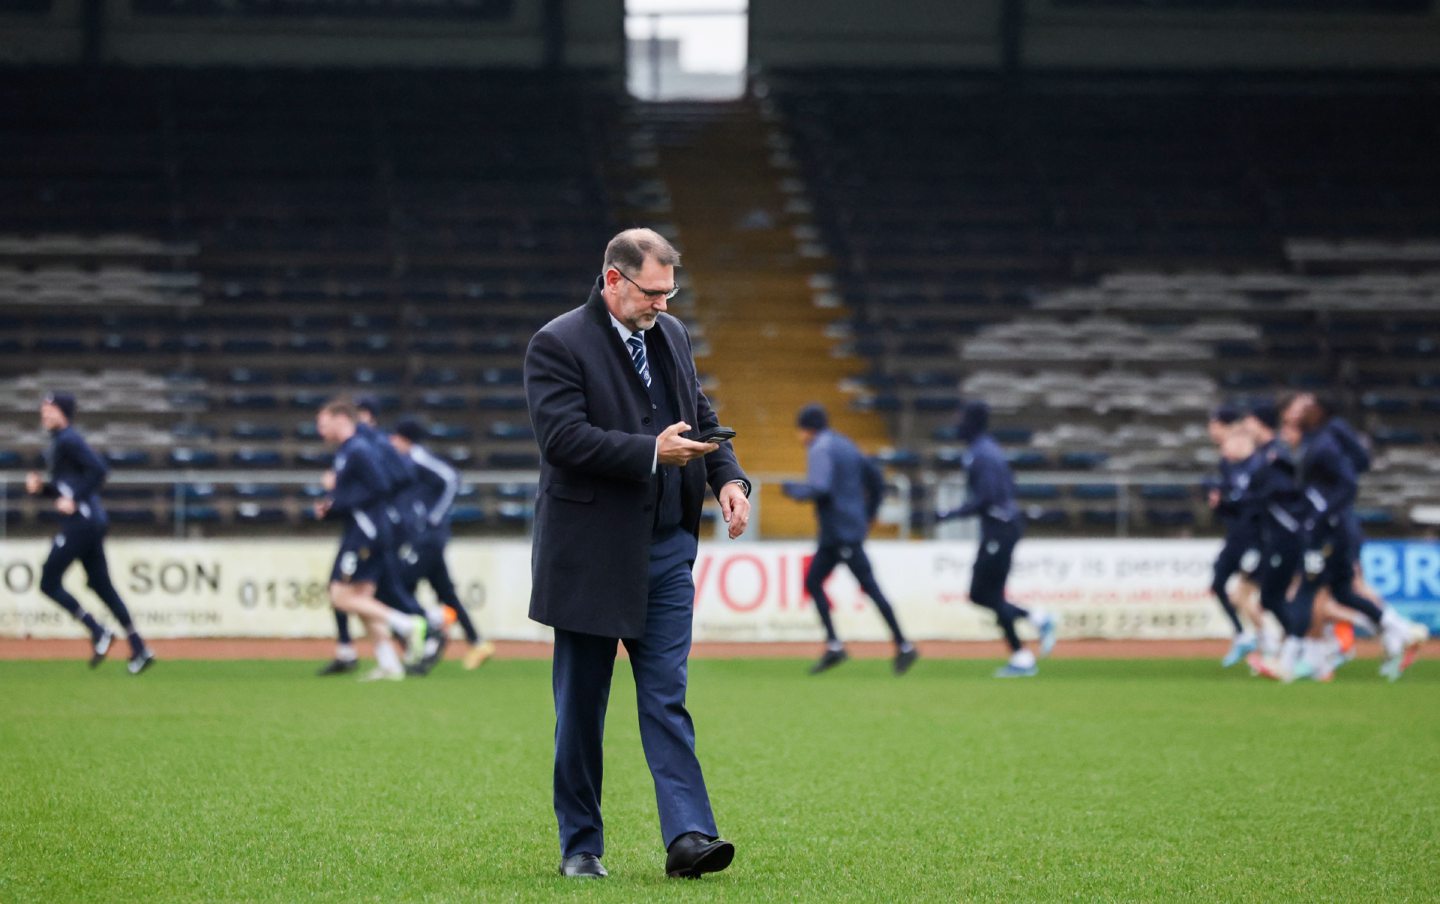 Dundee managing director John Nelms on the Dens Park pitch. Image: SNS